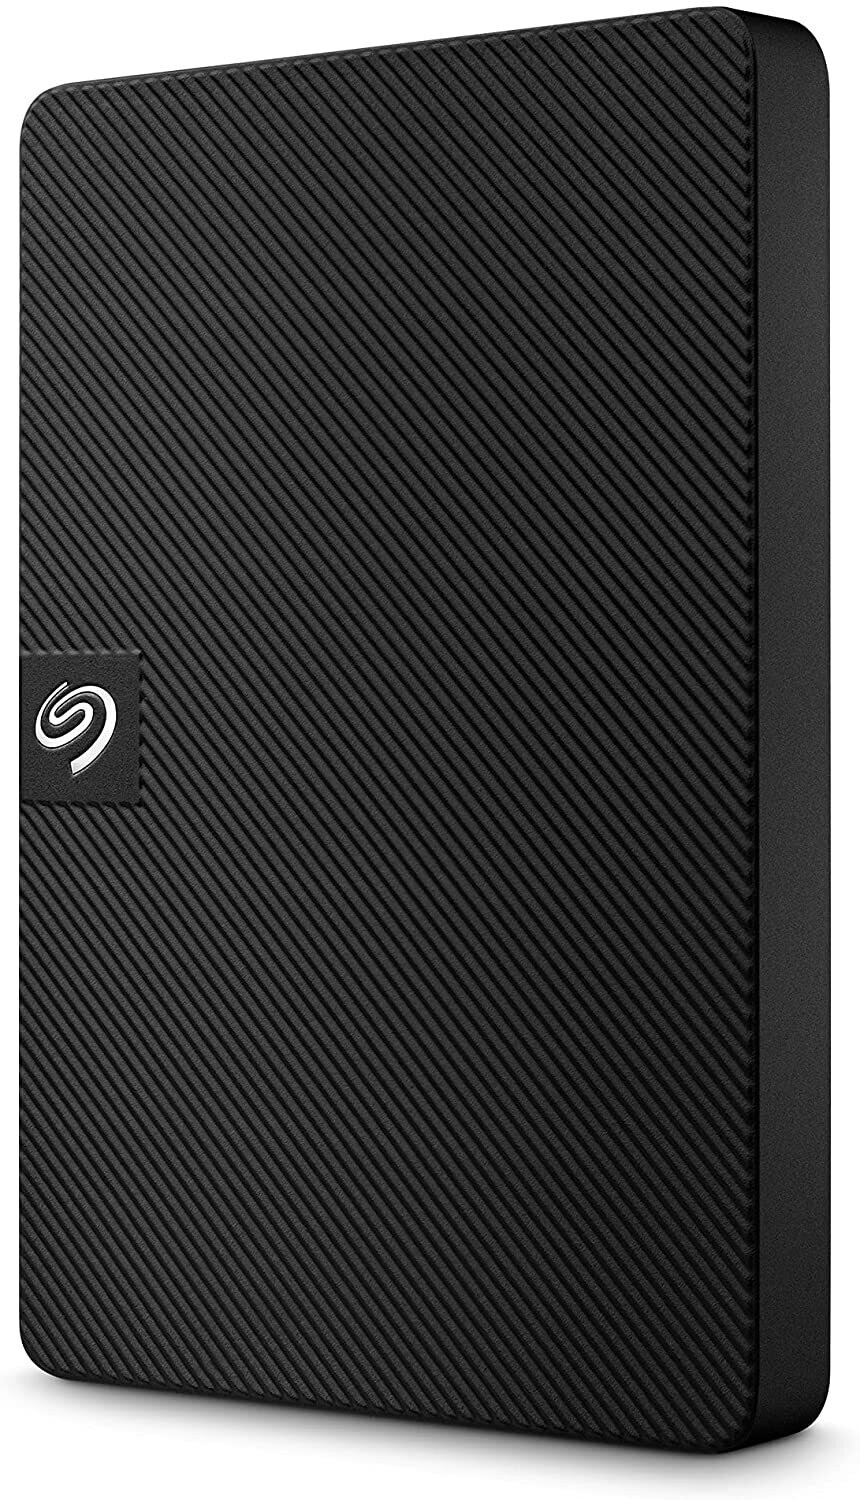 Seagate Expansion, 1 TB, External Hard Drive HDD, 2.5 Inch, USB 3.0